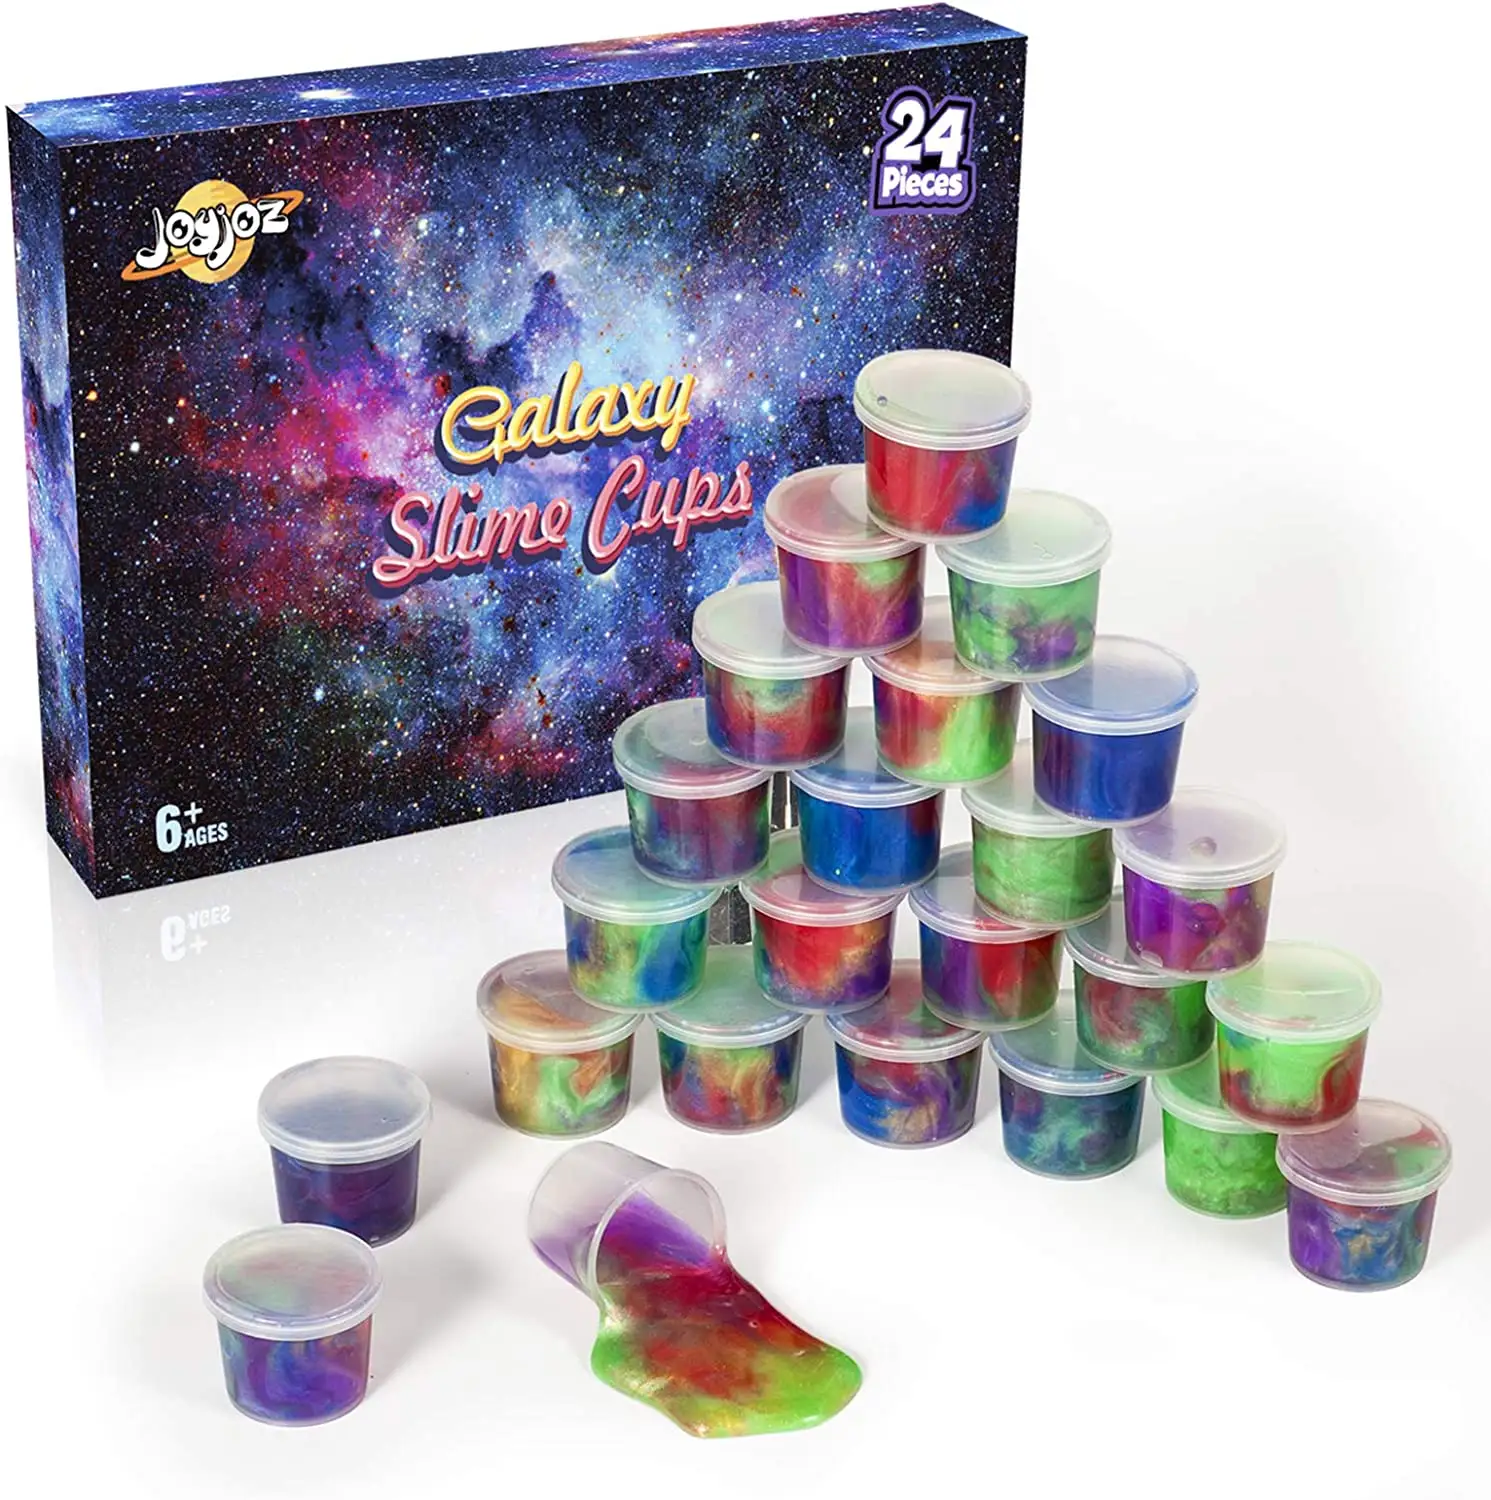 24 Pack Playdough Kit Clay Stress Relief Sludge Squishies Galaxy Planet Putty Crystal Slime Toys